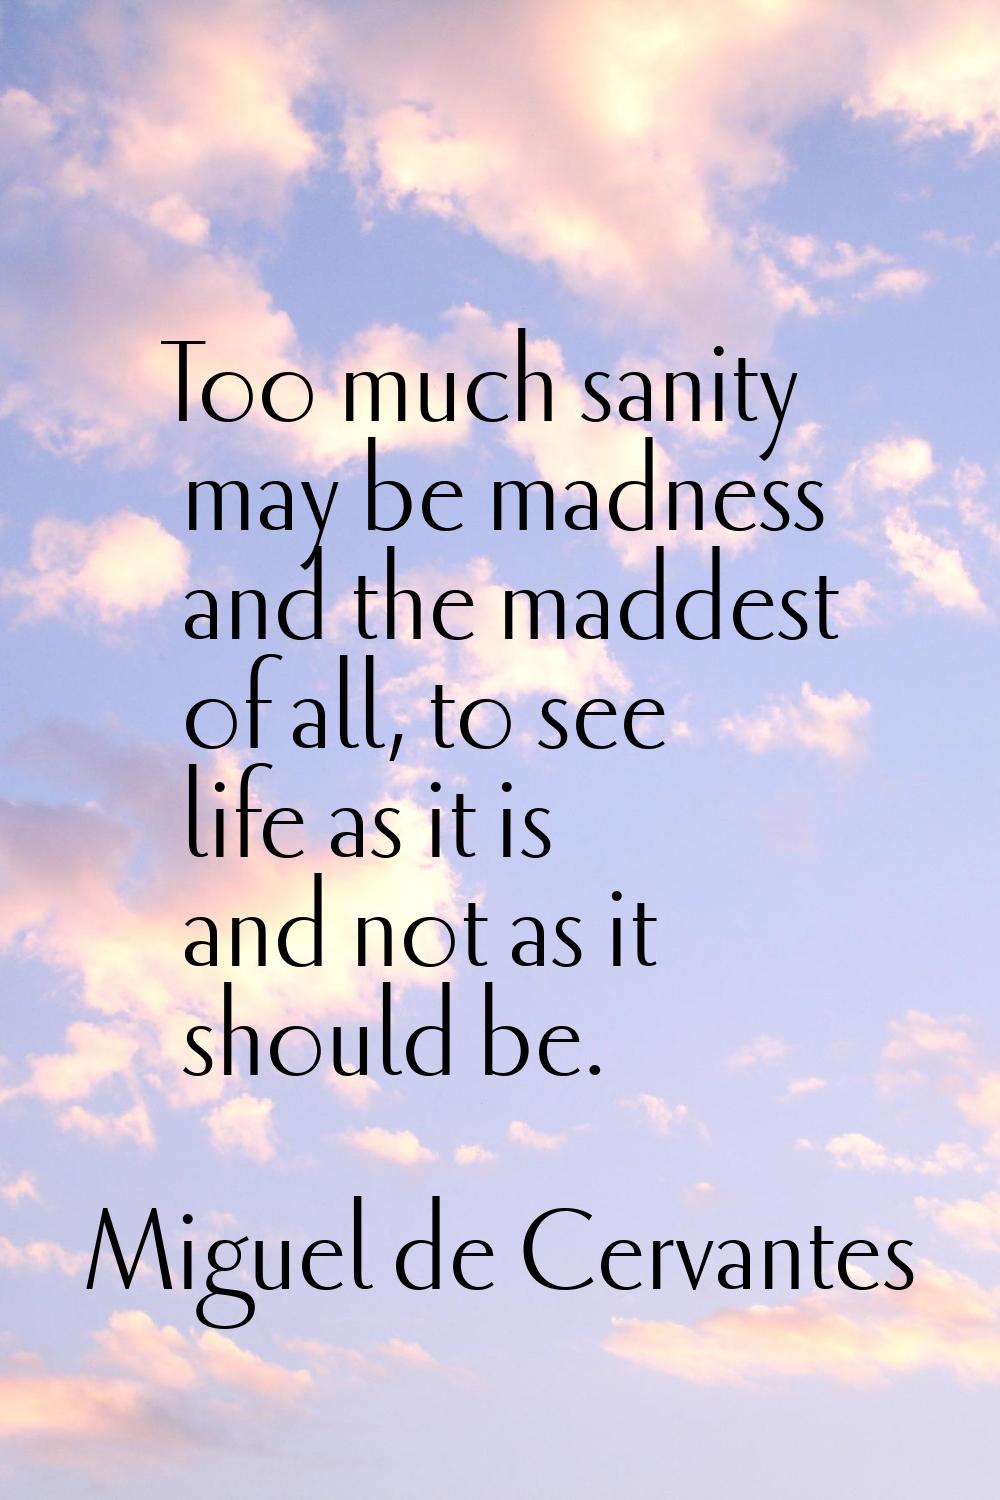 Too much sanity may be madness and the maddest of all, to see life as it is and not as it should be